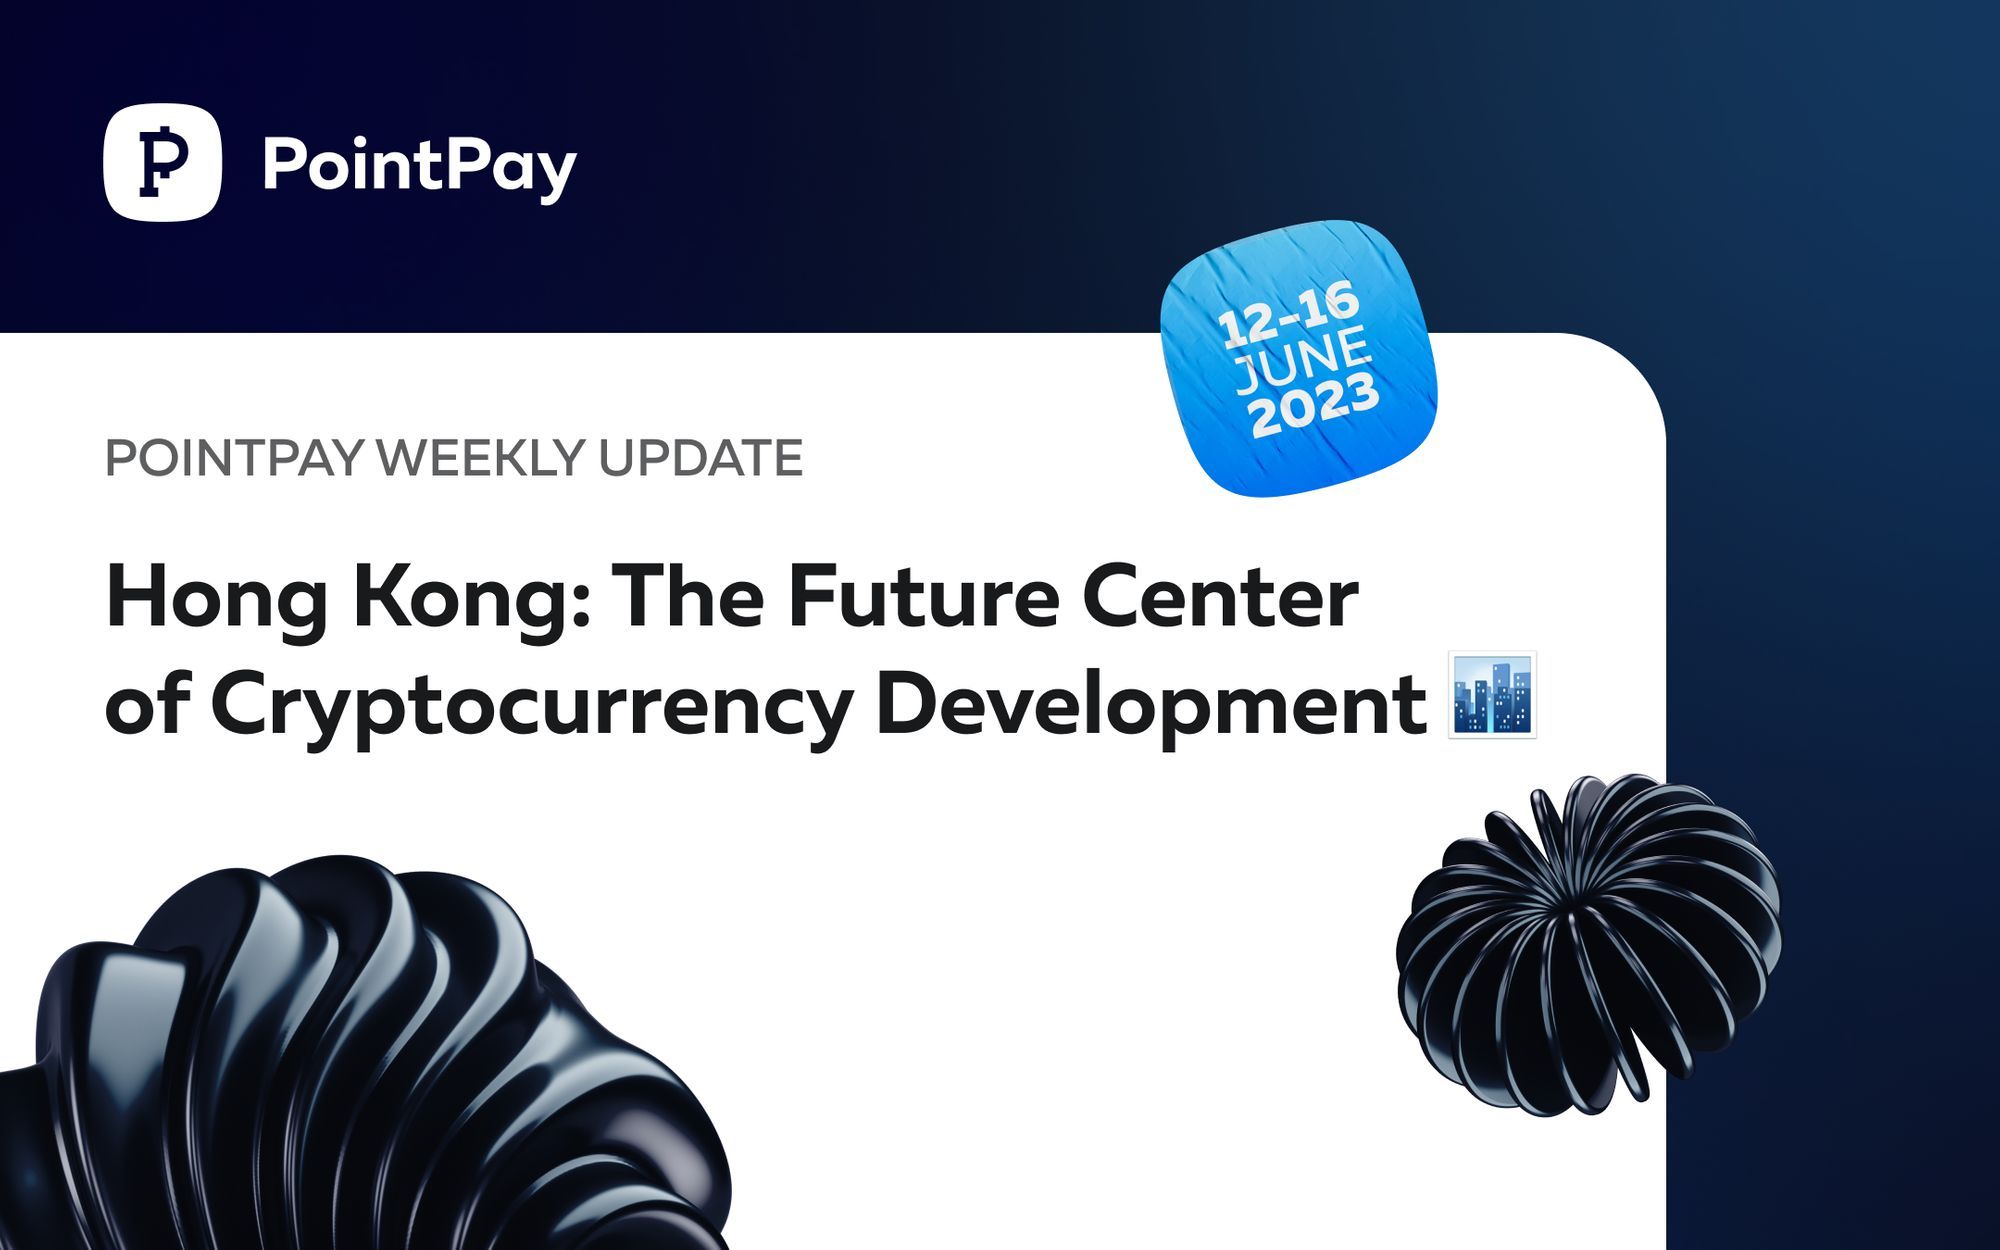 PointPay Weekly Update (12 - 16 June 2023)